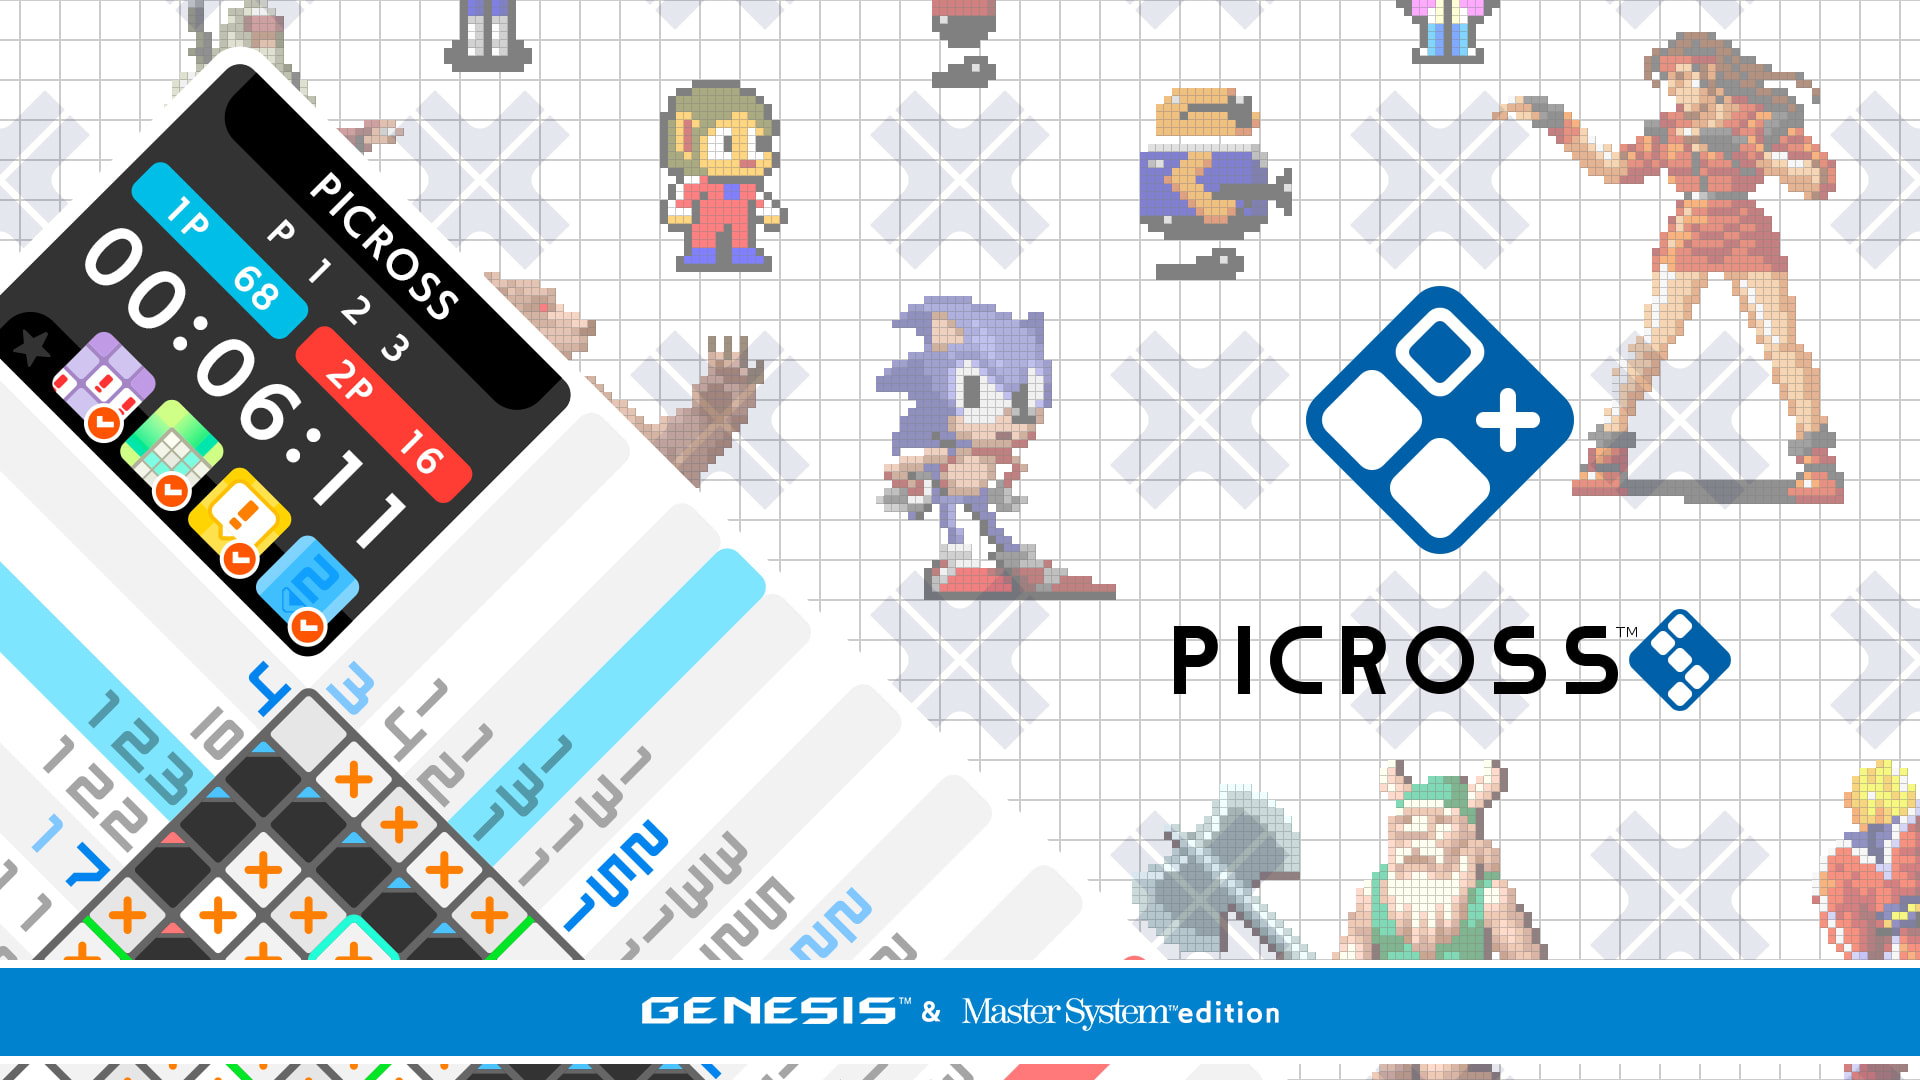 PICROSS S GENESIS & Master System edition 1